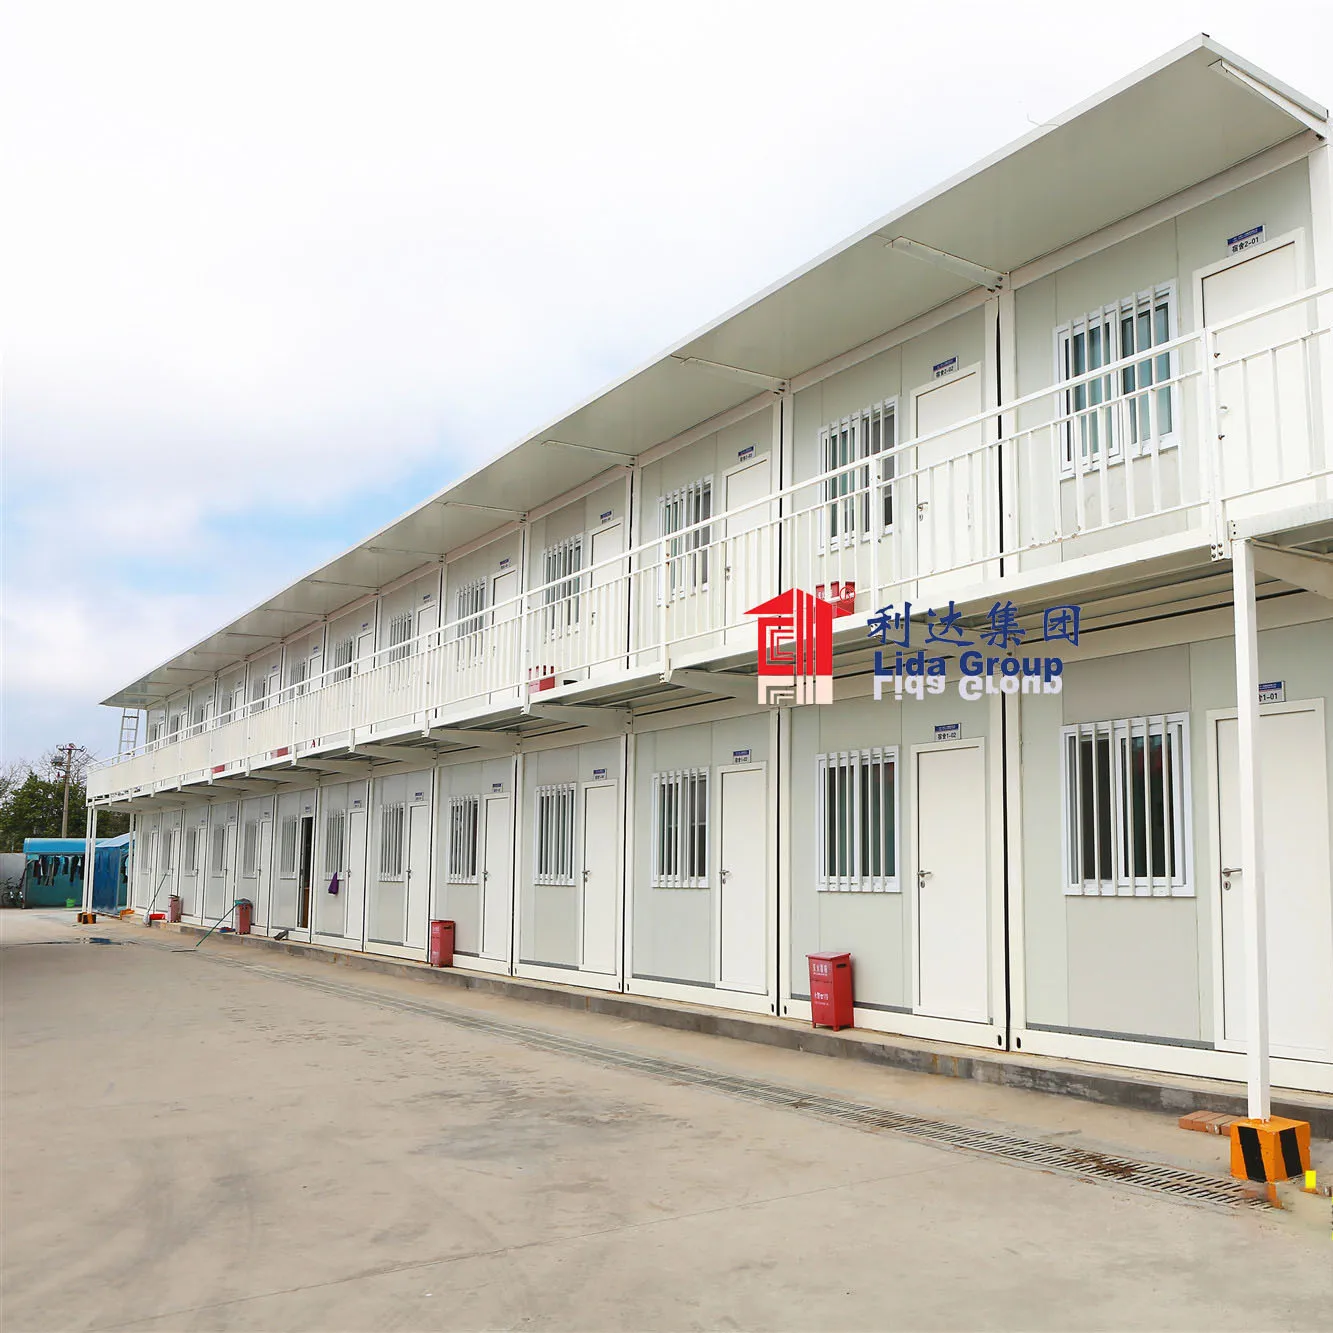 Lida Group New shipping container house inside Suppliers used as office, meeting room, dormitory, shop-3